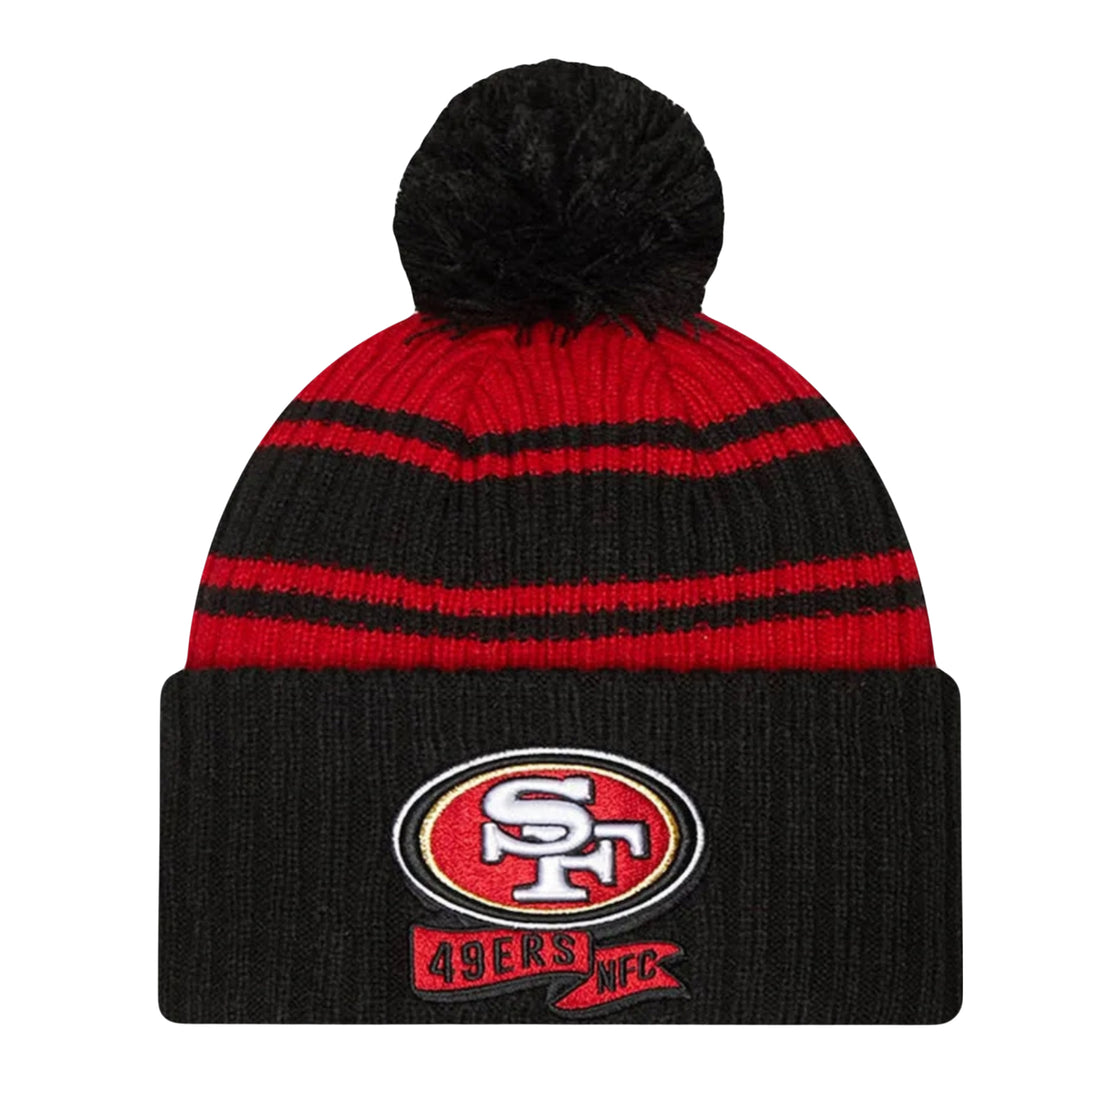 San Francisco 49ers Official NFL Sideline Secondary Sport Beanie Knit